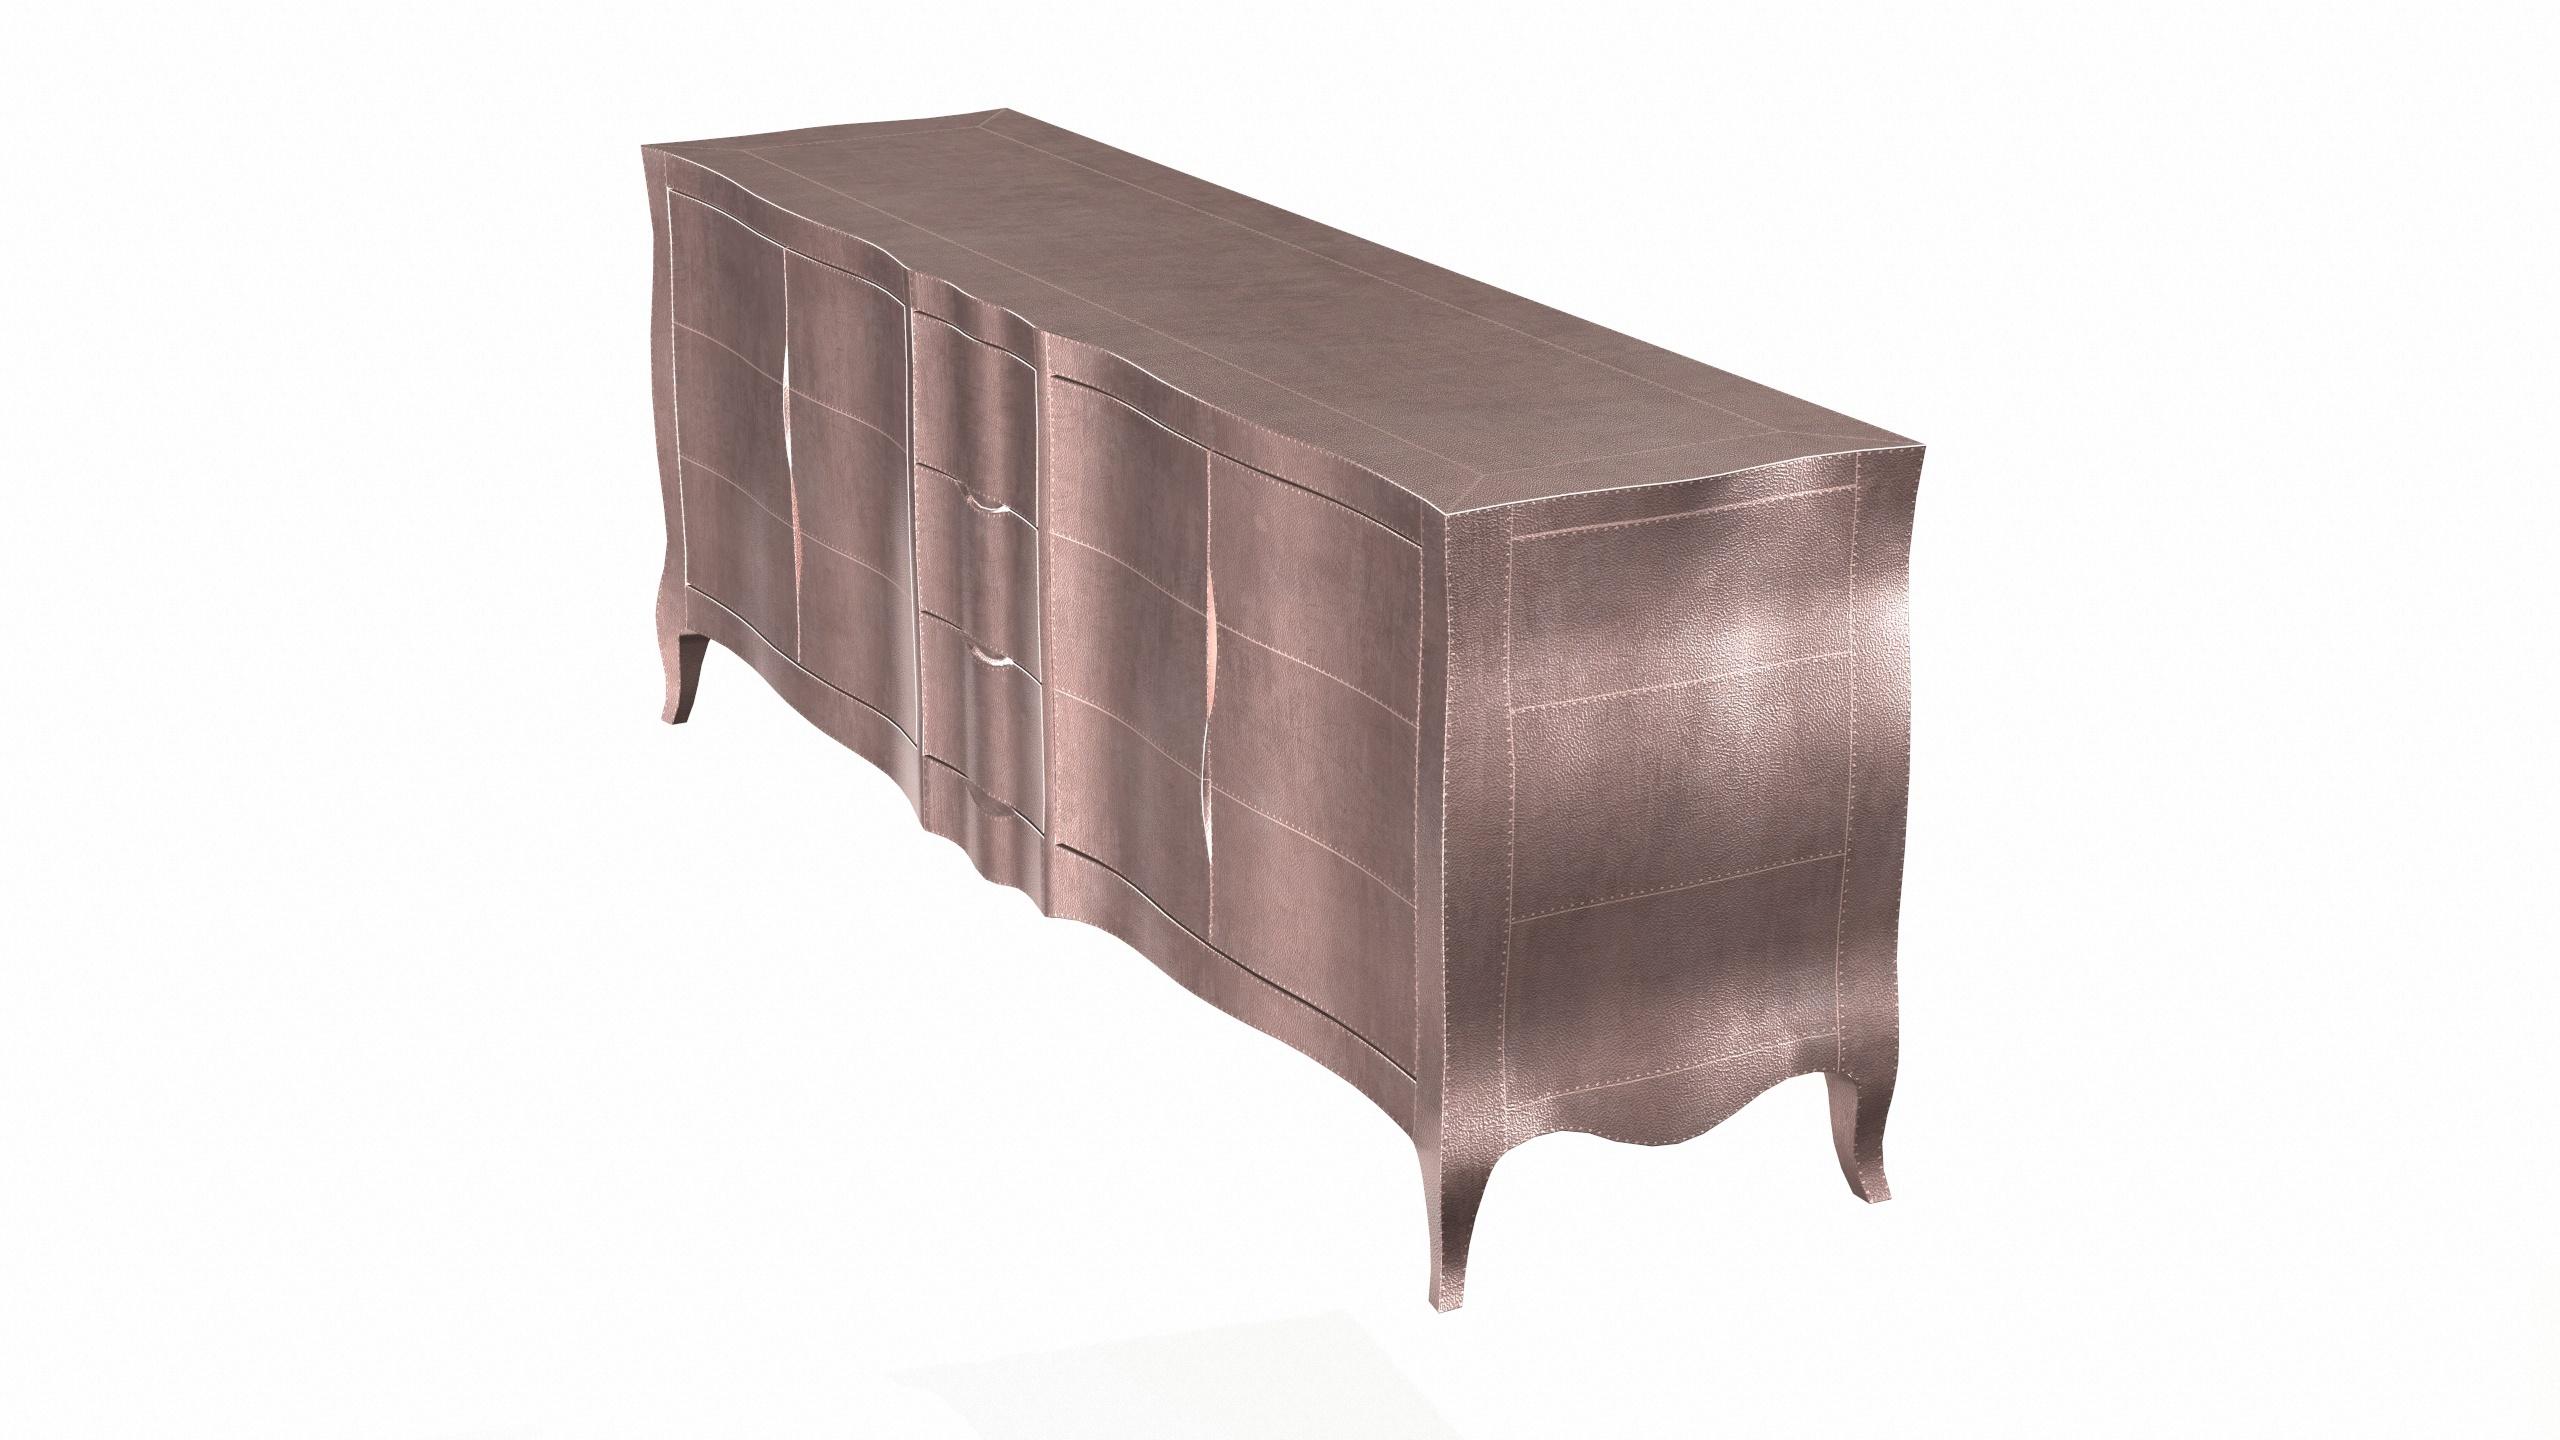 Hand-Carved Louise Credenza Art Deco Credenzas in Fine Hammered Copper by Paul Mathieu For Sale